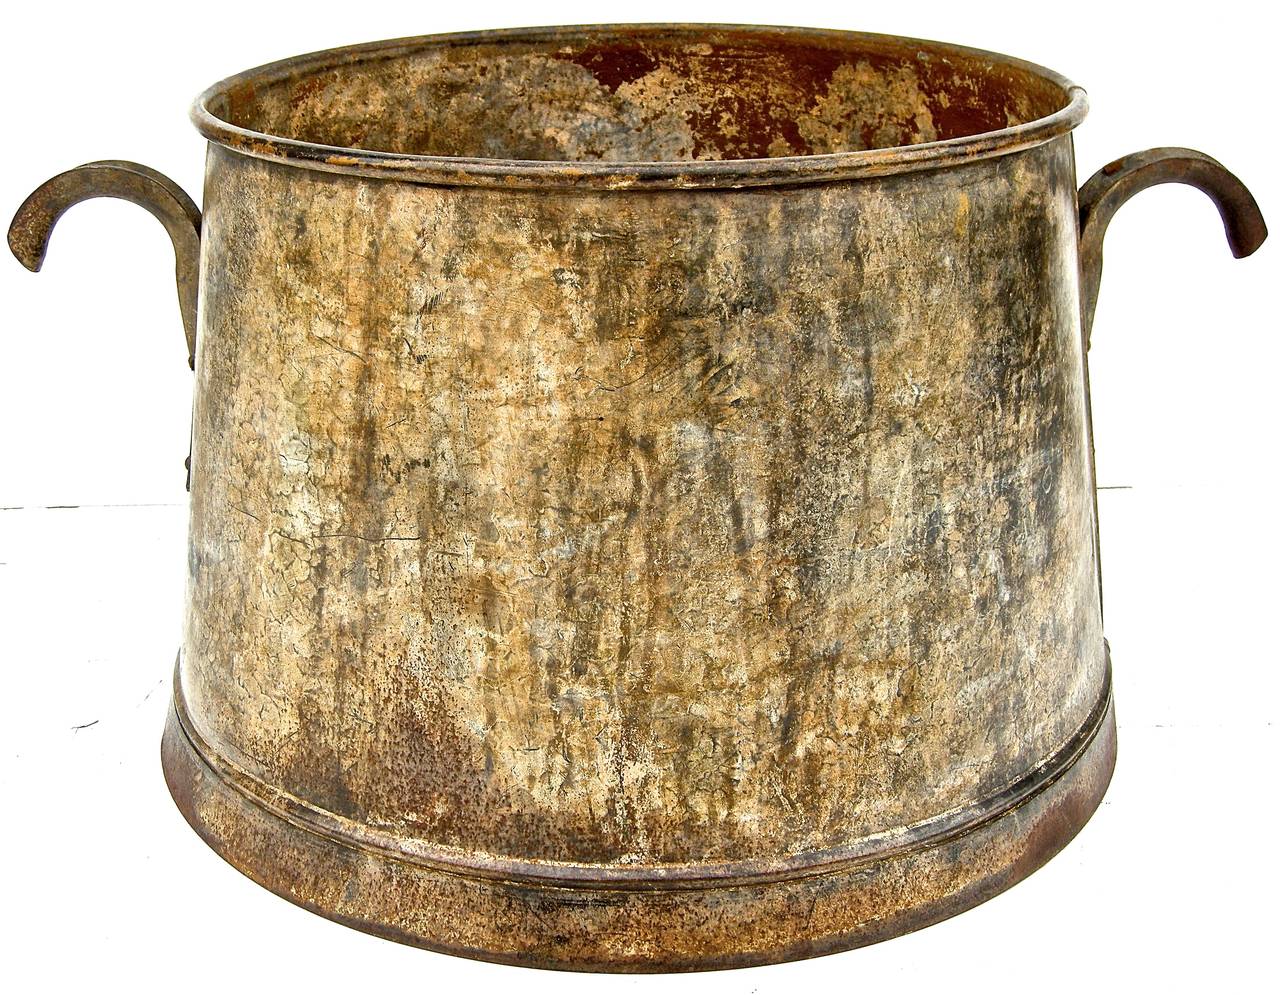 Striking vintage, metal, French dairy pot. Having a highly sculptural shape and form with an extremely unusual and eye catching pair of carrier handles. Beautiful time worn and weathered overall surface and oxidized patina.